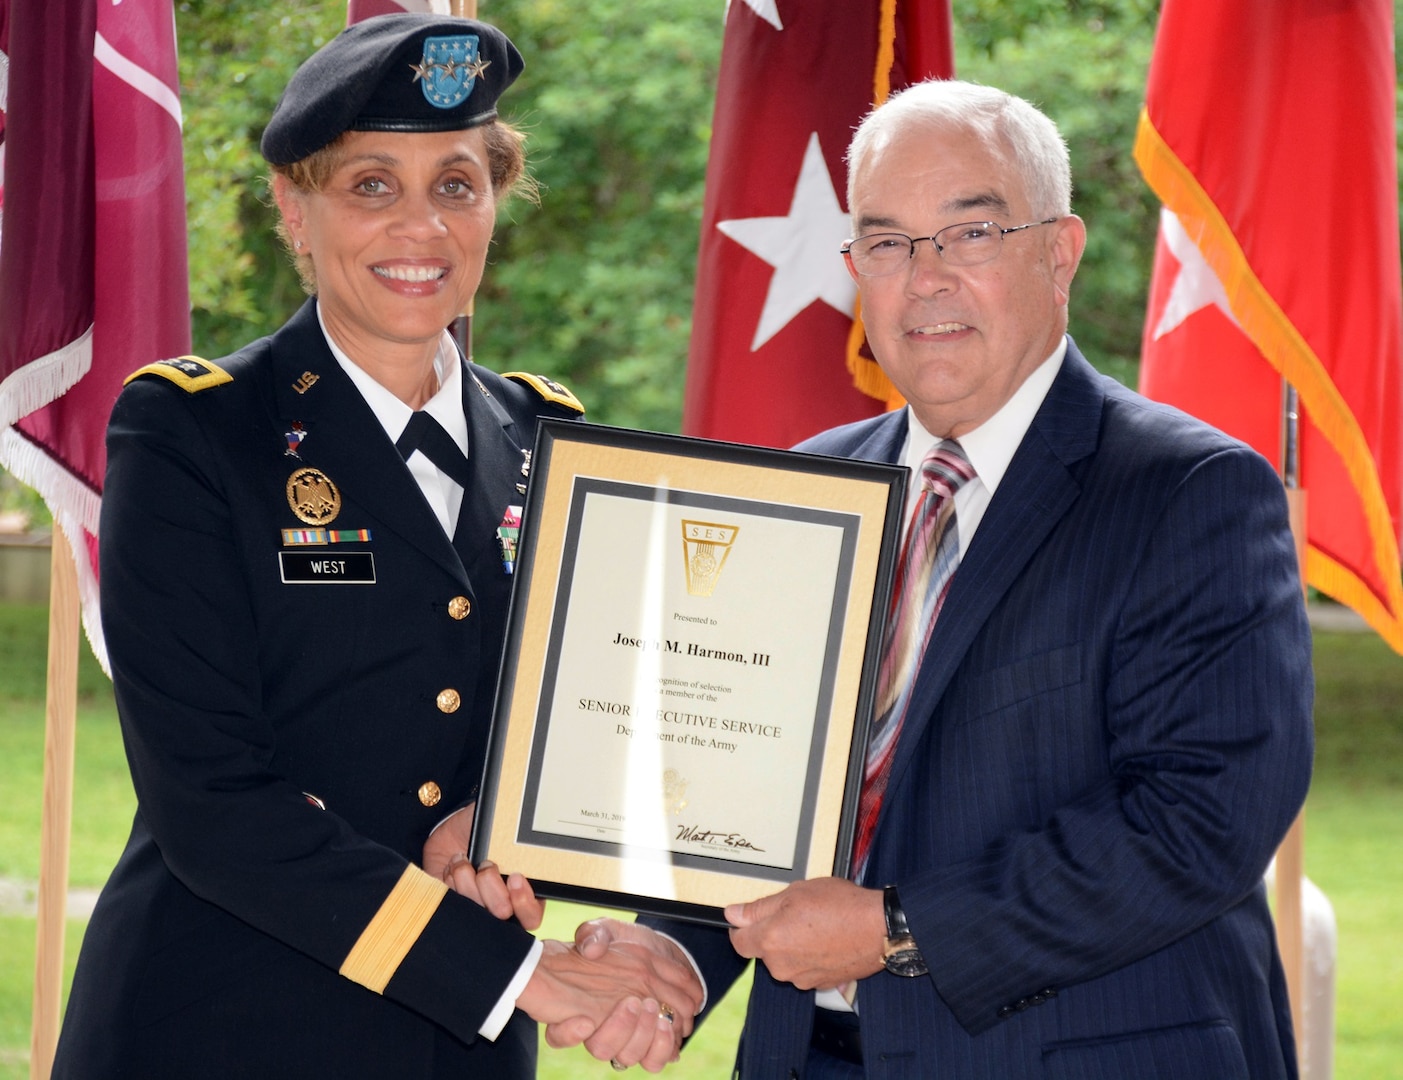 Lt. Gen. Nadja Y. West, The Surgeon General of the U.S. Army and commanding general, U.S. Army Medical Command, congratulates Joseph M. Harmon III, deputy to the Commanding General, U.S. Army Medical Department Center and School, Health Readiness Center of Excellence. Harmon was appointed to the Senior Executive Service in a ceremony at the Army Medical Department Museum April 29.